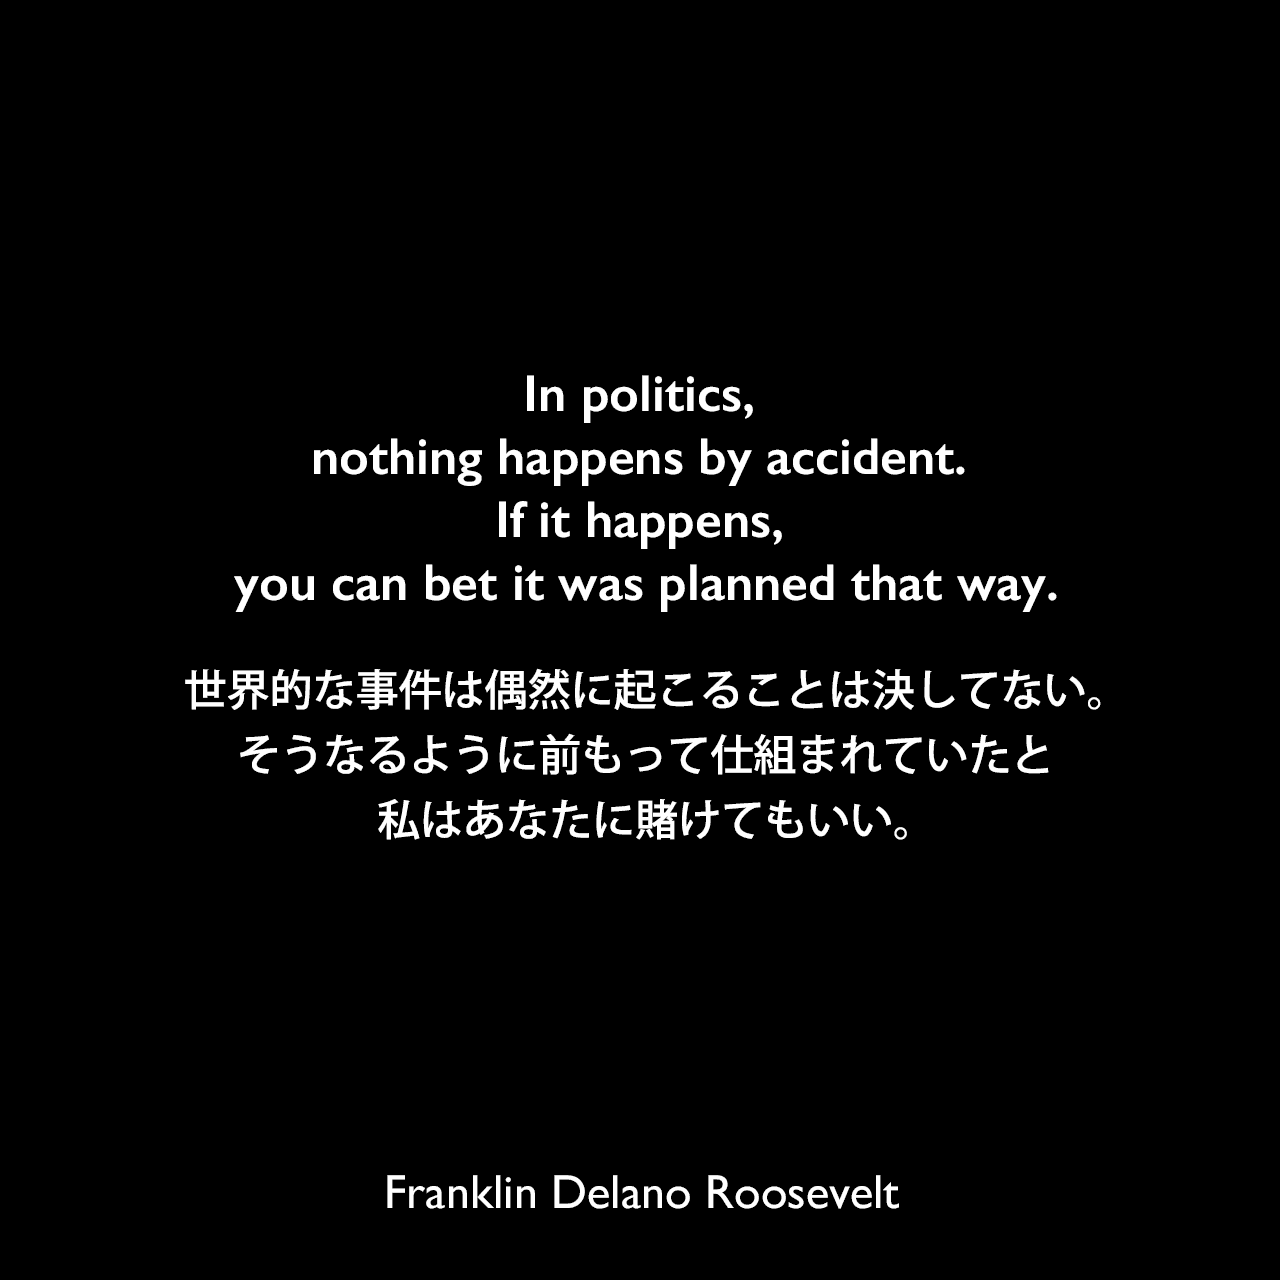 In politics, nothing happens by accident. If it happens, you can bet it was planned that way.世界的な事件は偶然に起こることは決してない。そうなるように前もって仕組まれていたと、私はあなたに賭けてもいい。Franklin Delano Roosevelt